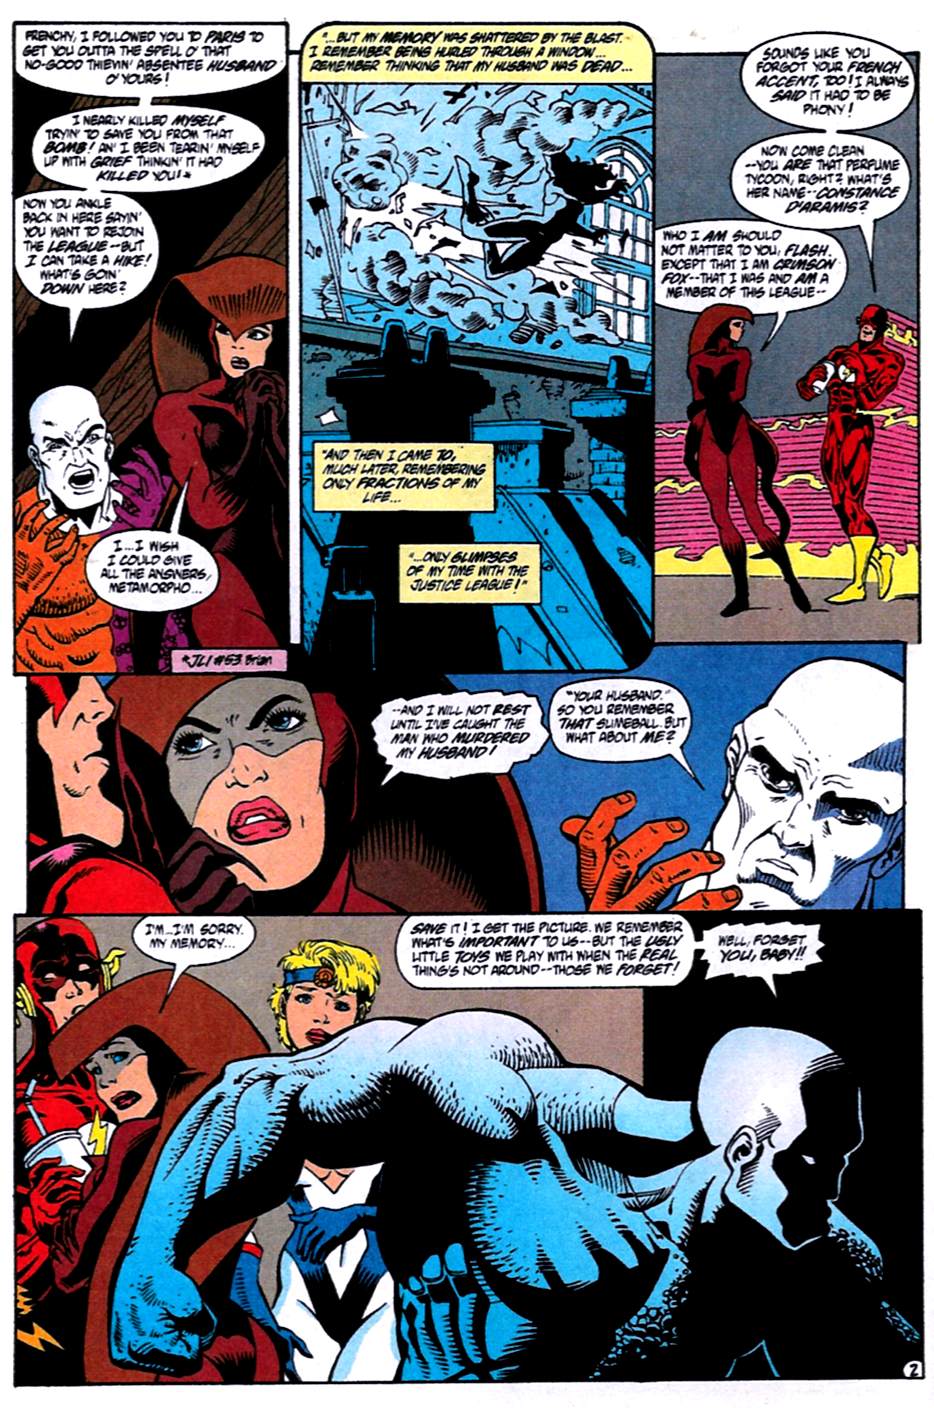 Justice League International (1993) 61 Page 2